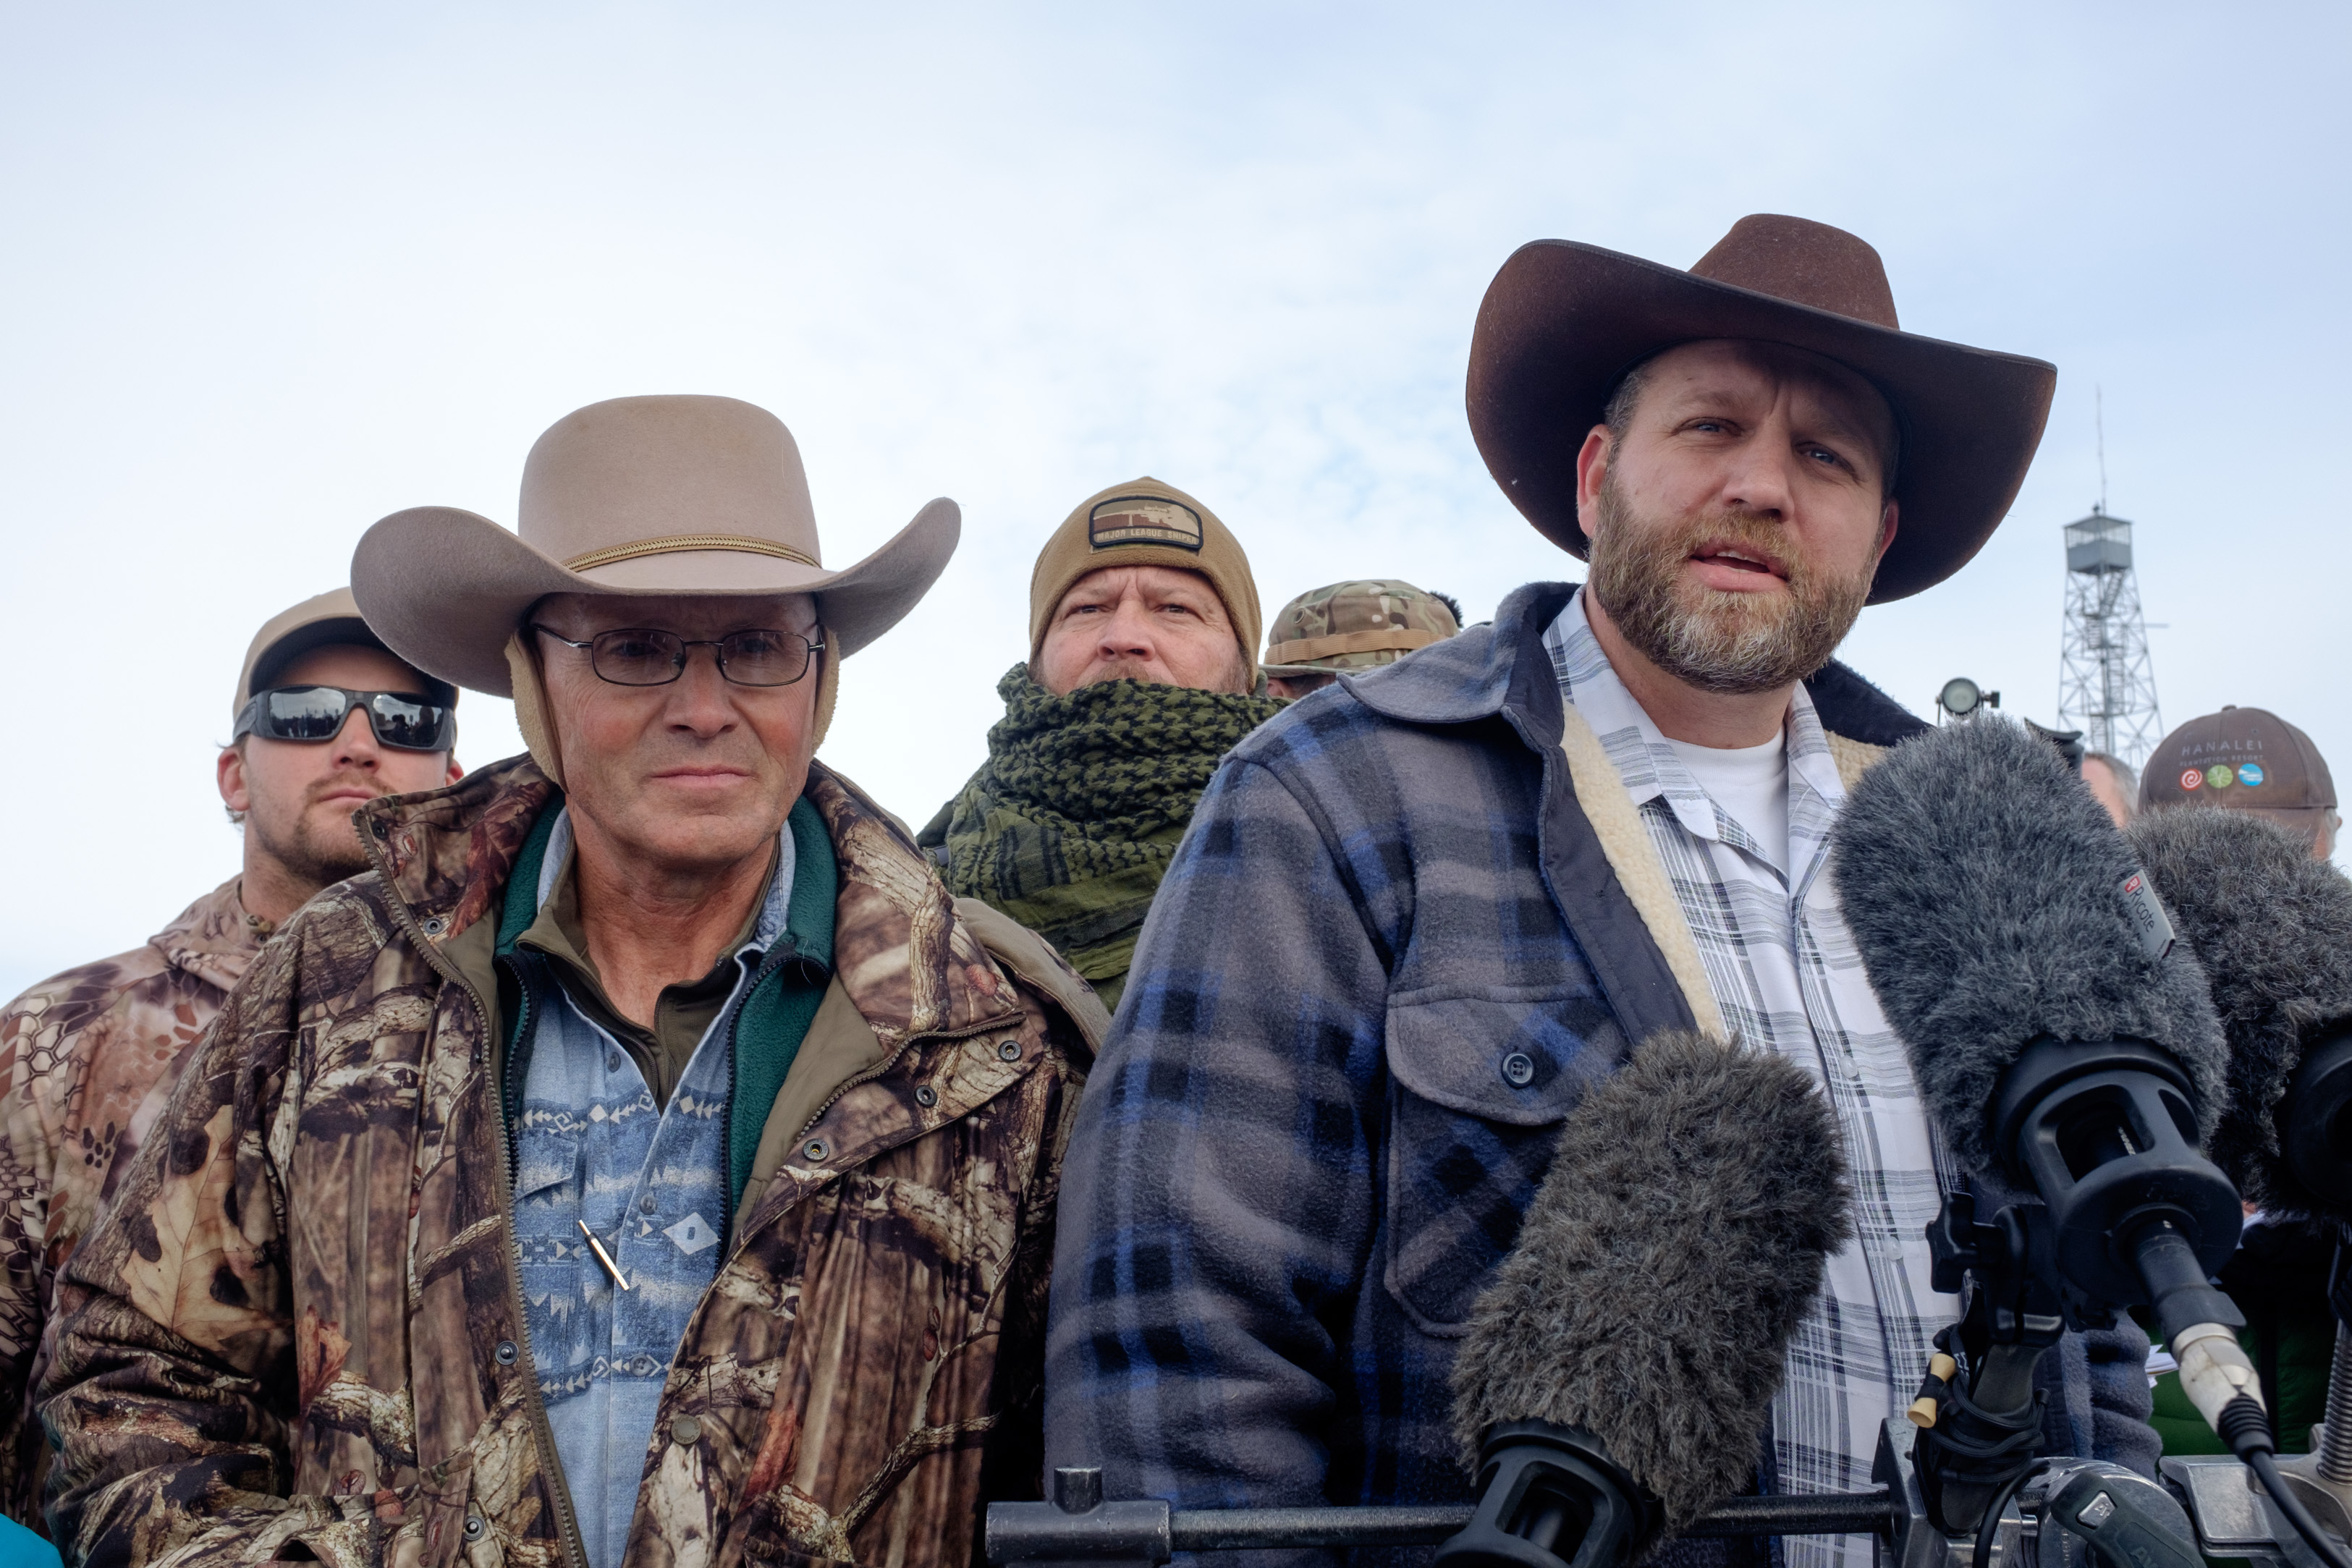 Ammon Bundy(R), leader of a group of armed anti-government protesters speaks to the media as other members look on at the Malheur National Wildlife Refuge near Burns, Ore., on Jan. 4, 2016.